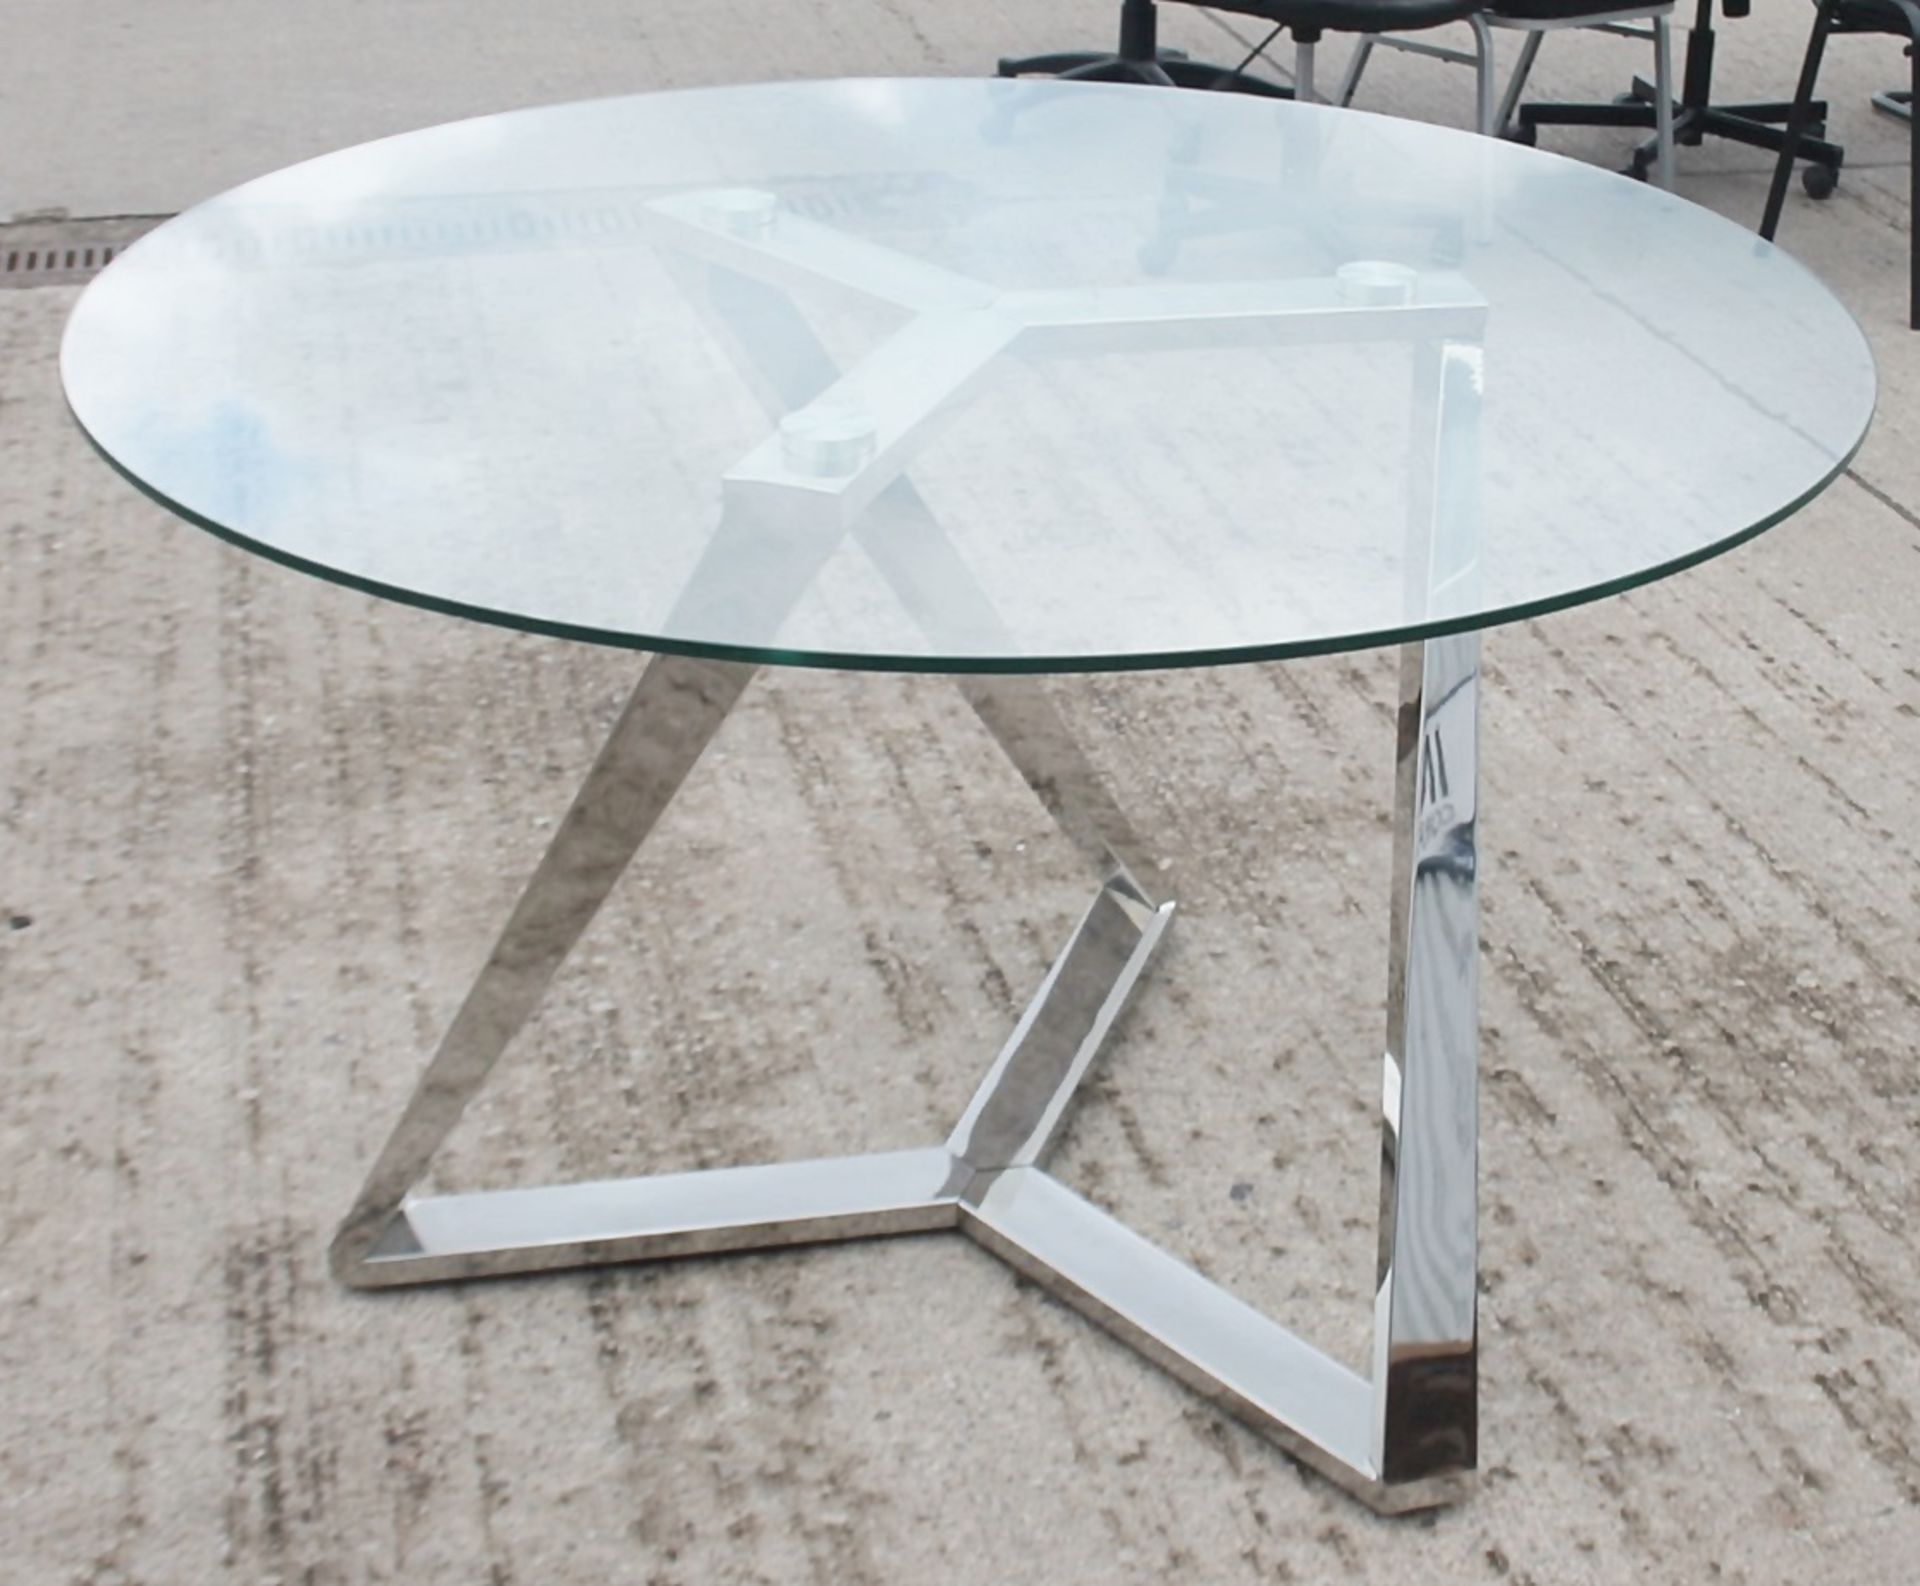 1 x Glass Topped Round Dining Tables With Angled Chrome Base - Dimensions: Ø120 x H75cm - Image 3 of 4